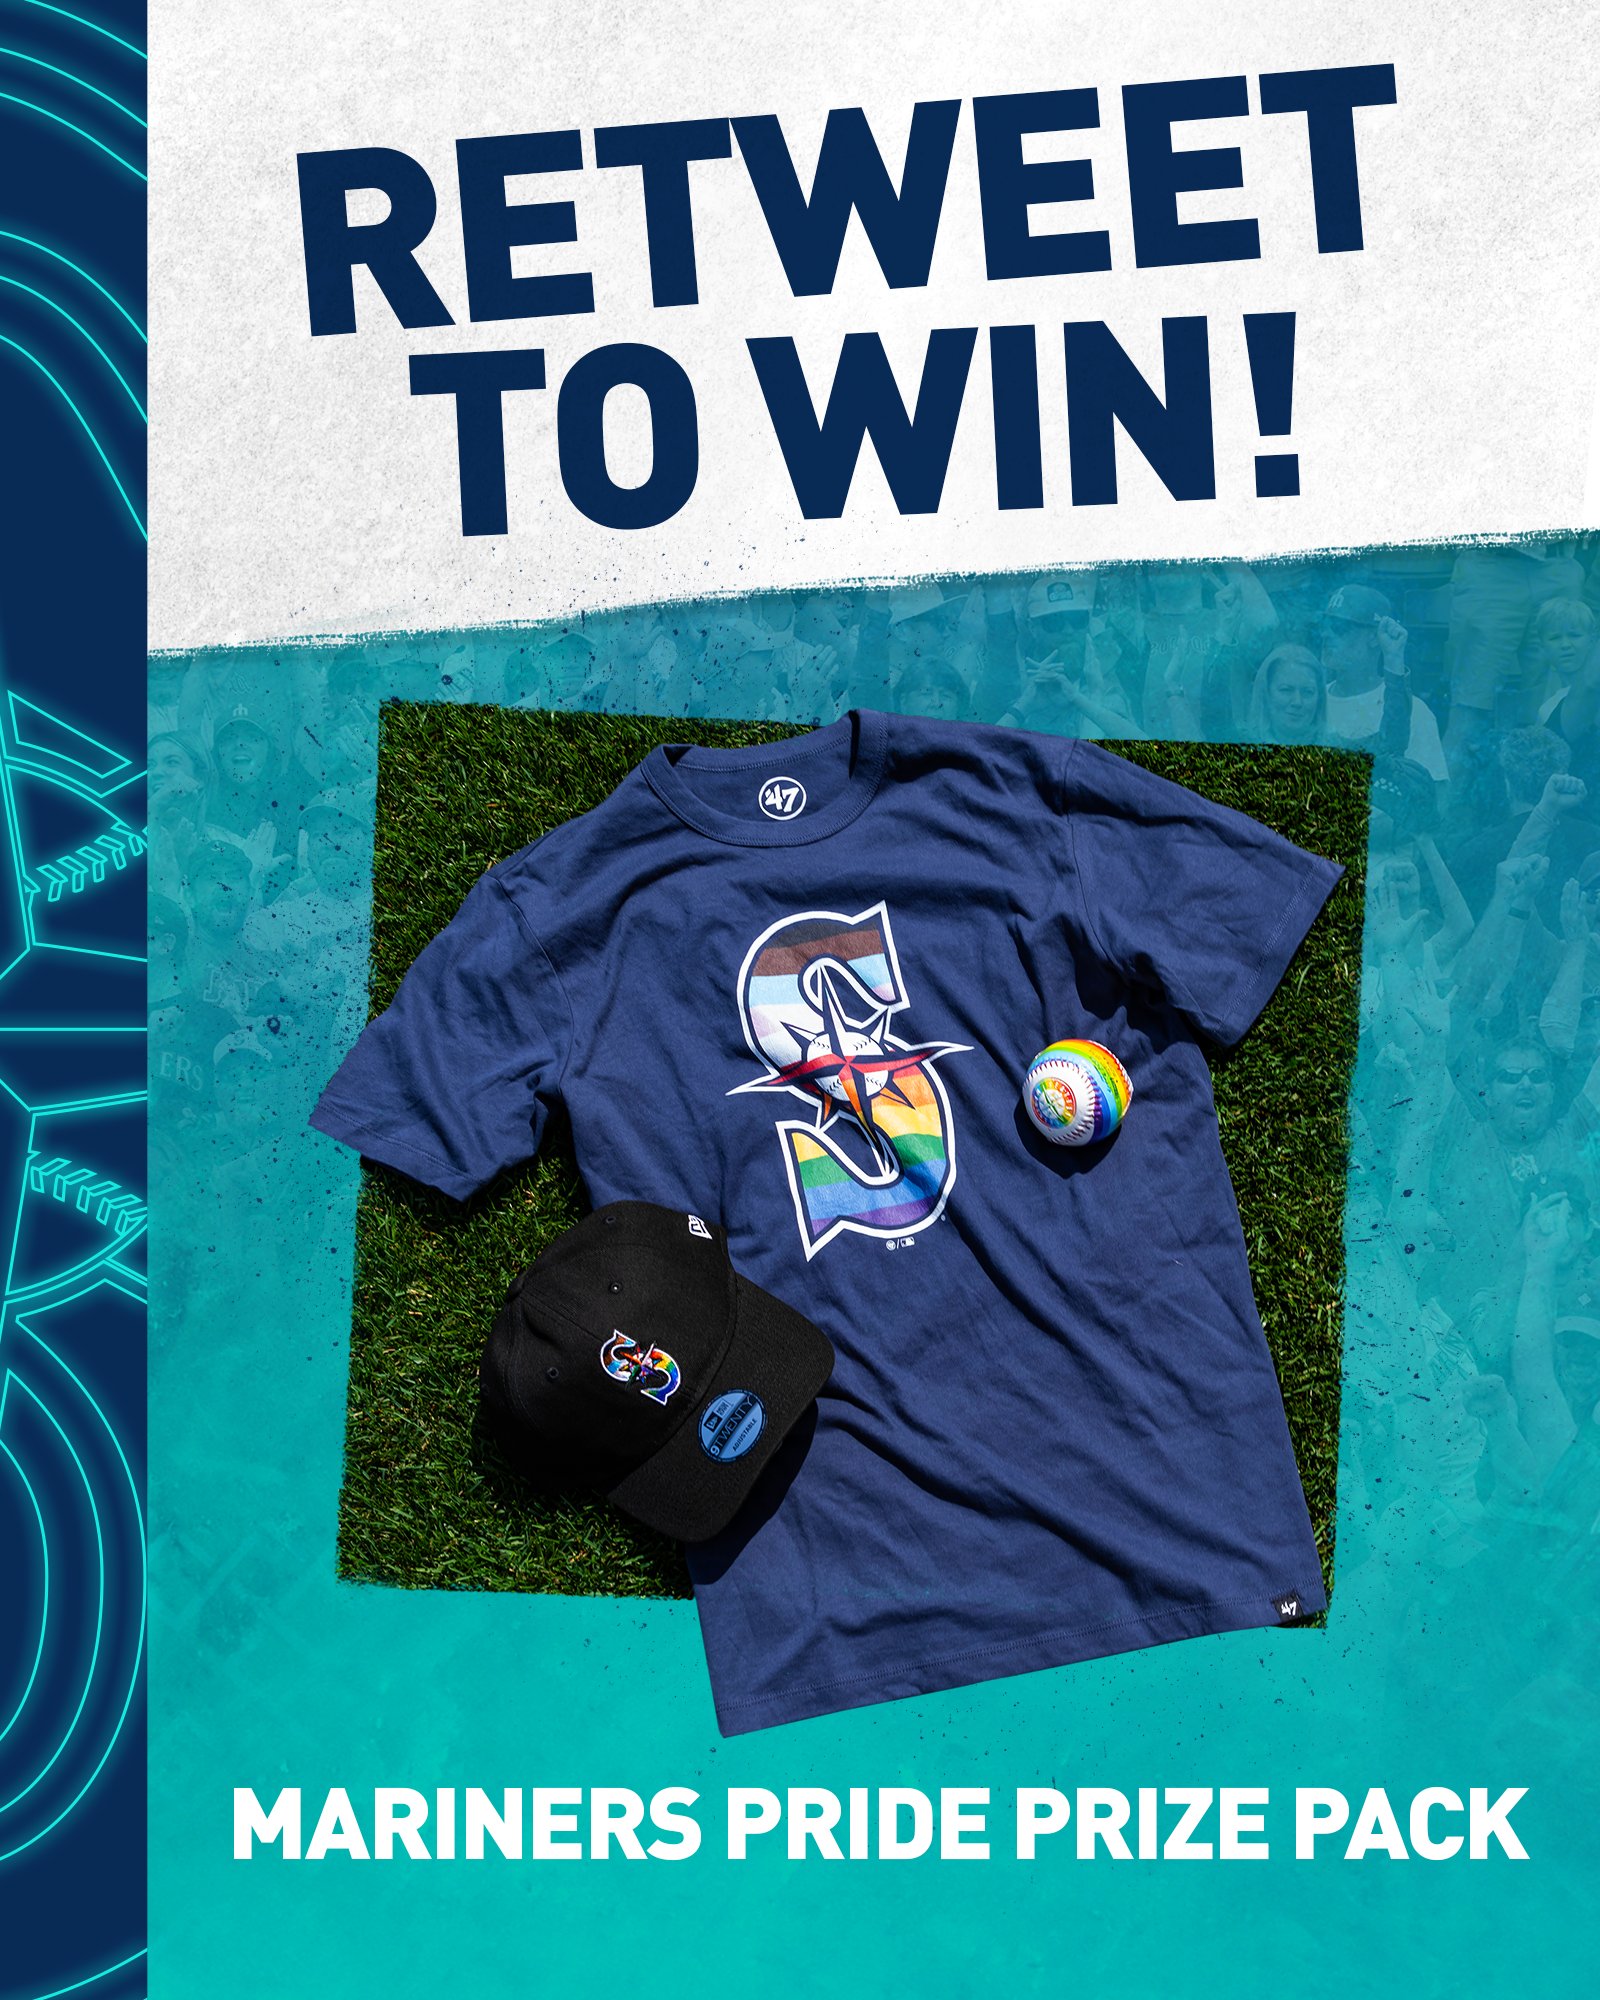 Seattle Mariners on X: 🏳️‍🌈 RETWEET TO WIN 🏳️‍🌈 We're kicking off the  weekend with Pride Night at @TMobilePark, so hit that retweet button for a  chance to win this Pride Prize